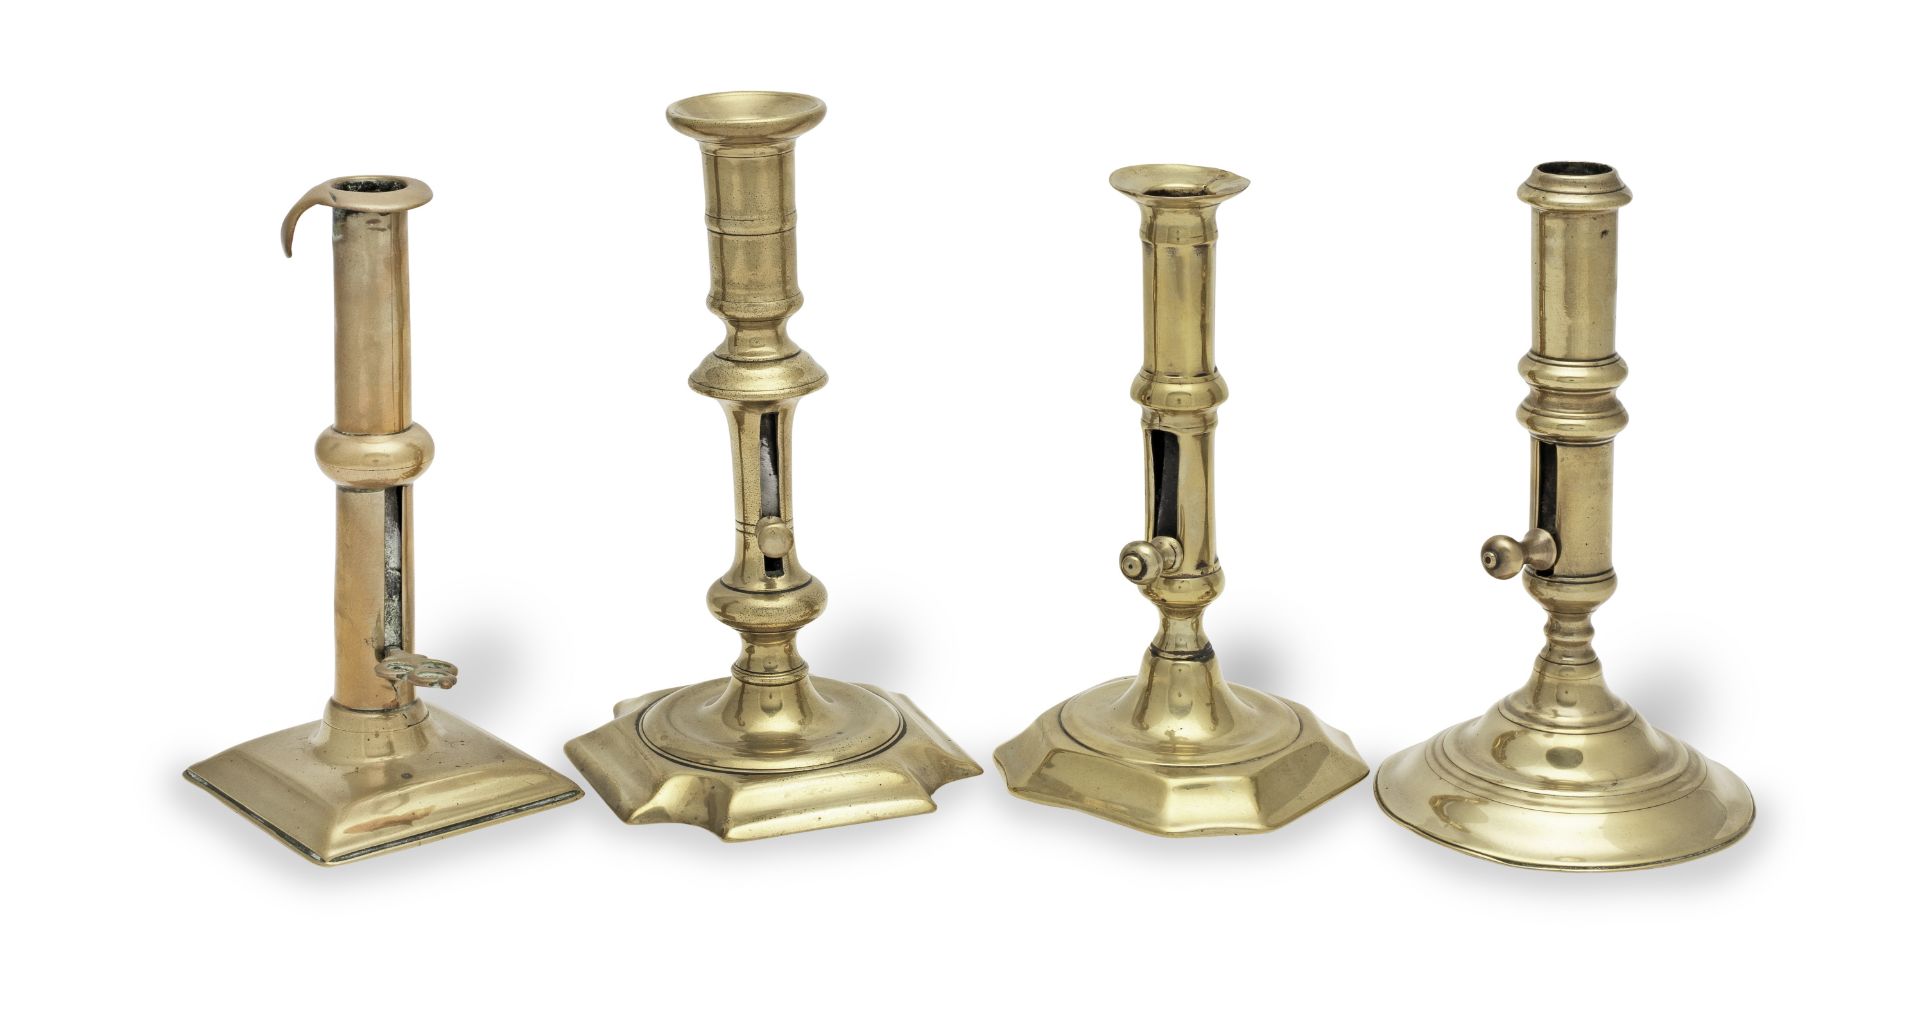 Four 18th century brass ejector candlesticks, English (4)